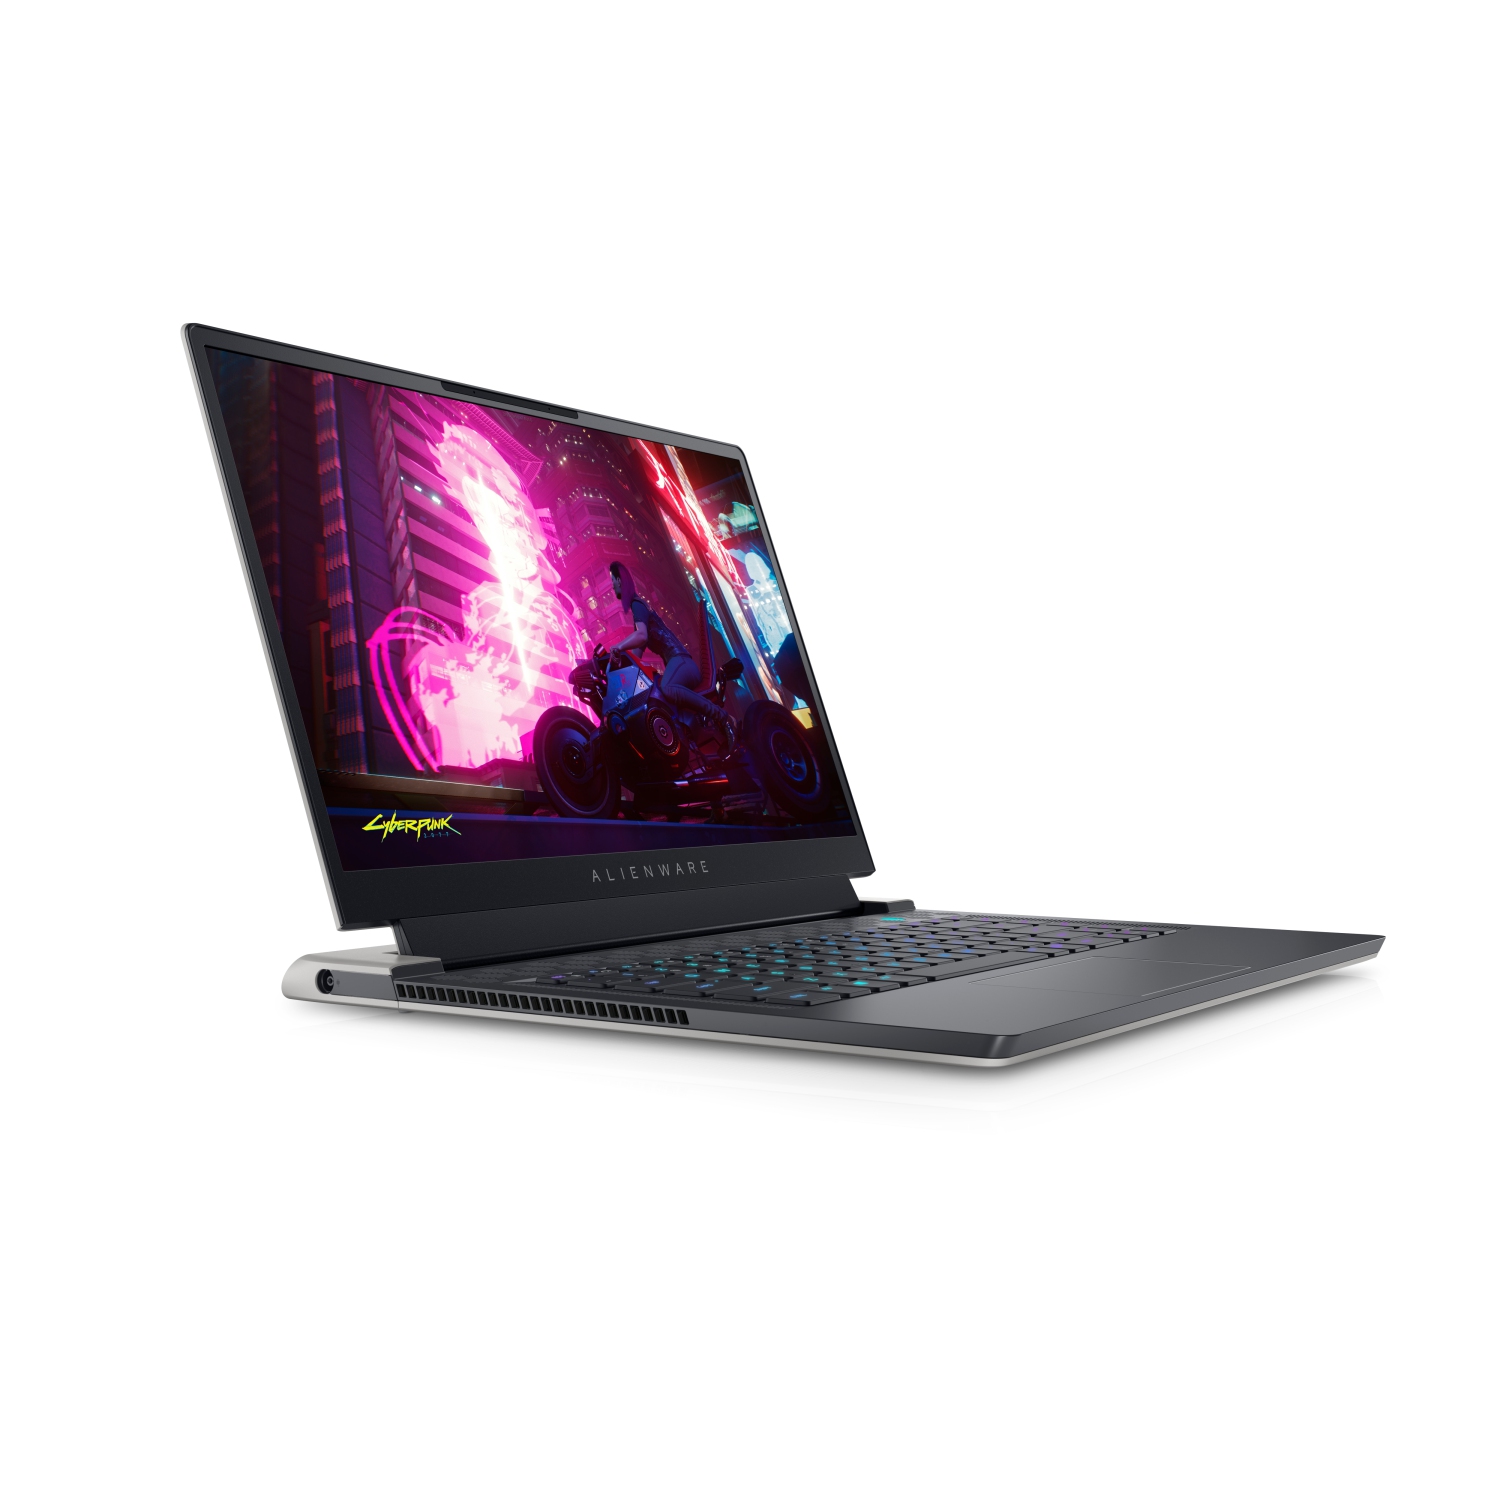 Refurbished (Excellent) - Dell Alienware X15 R1 Gaming Laptop (2021), 15.6" QHD, Core i7, 2TB SSD, 16GB RAM, RTX 3070, 8 Cores @ 4.6 GHz, 11th Gen CPU Certified